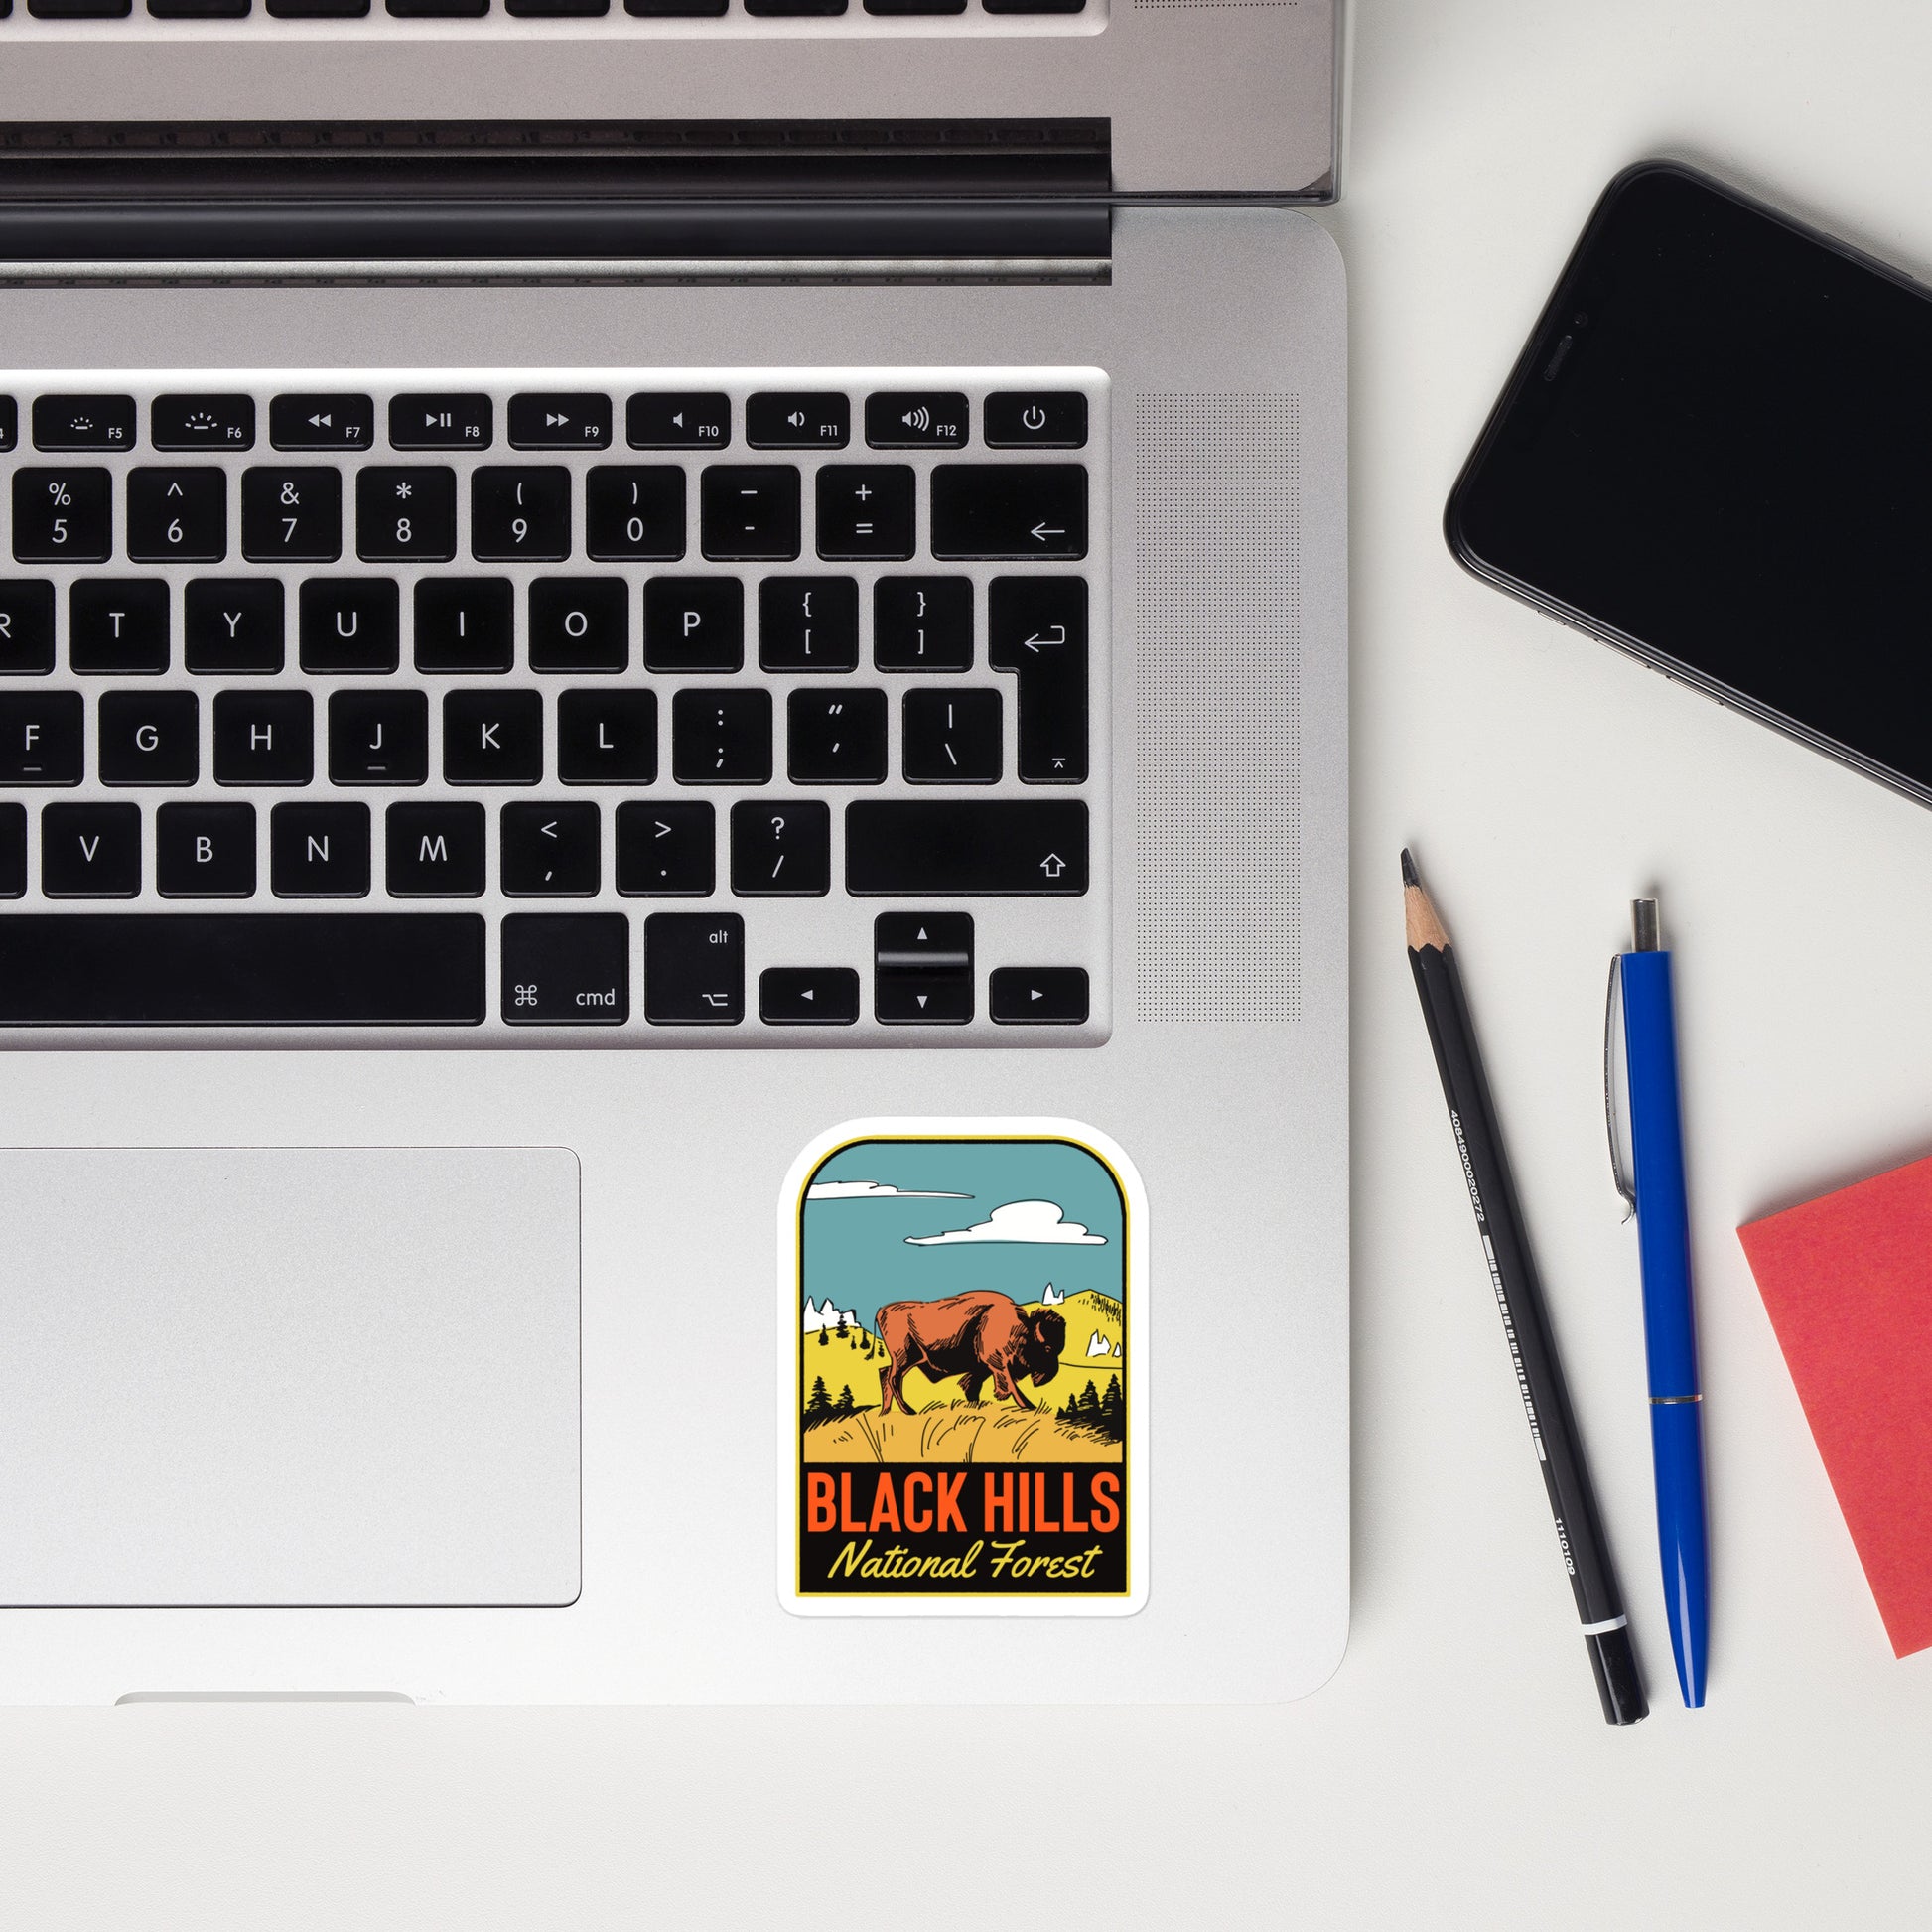 A sticker of Black Hills National Forest on a laptop